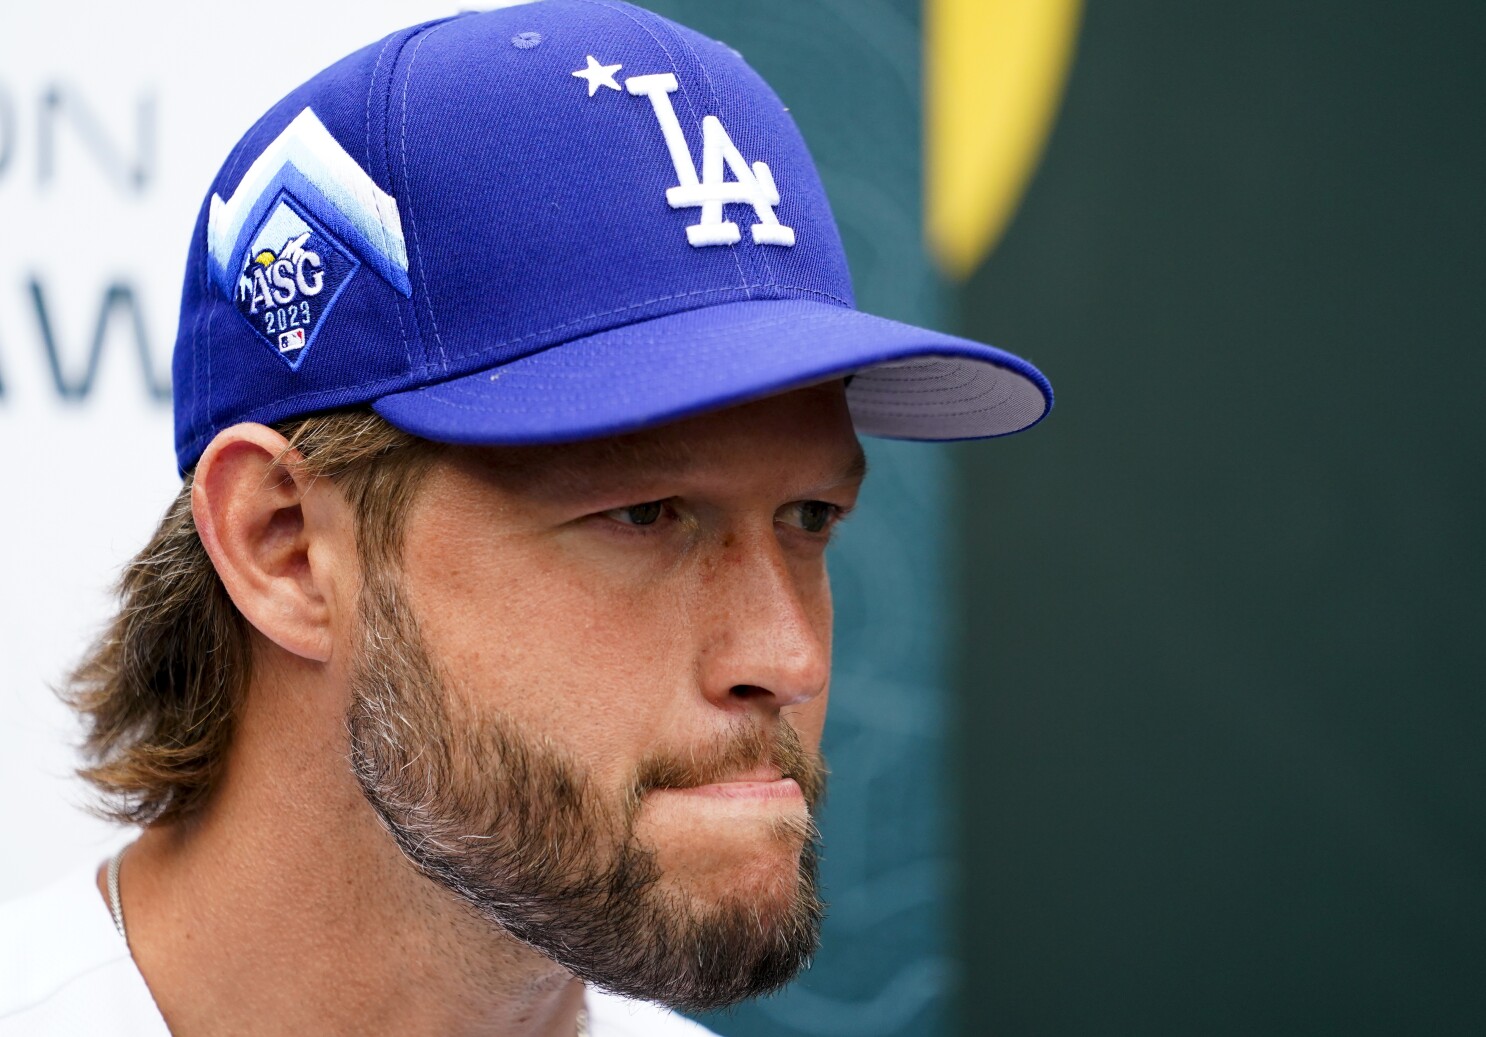 Dodgers Place Clayton Kershaw on the Injured List Due to Left